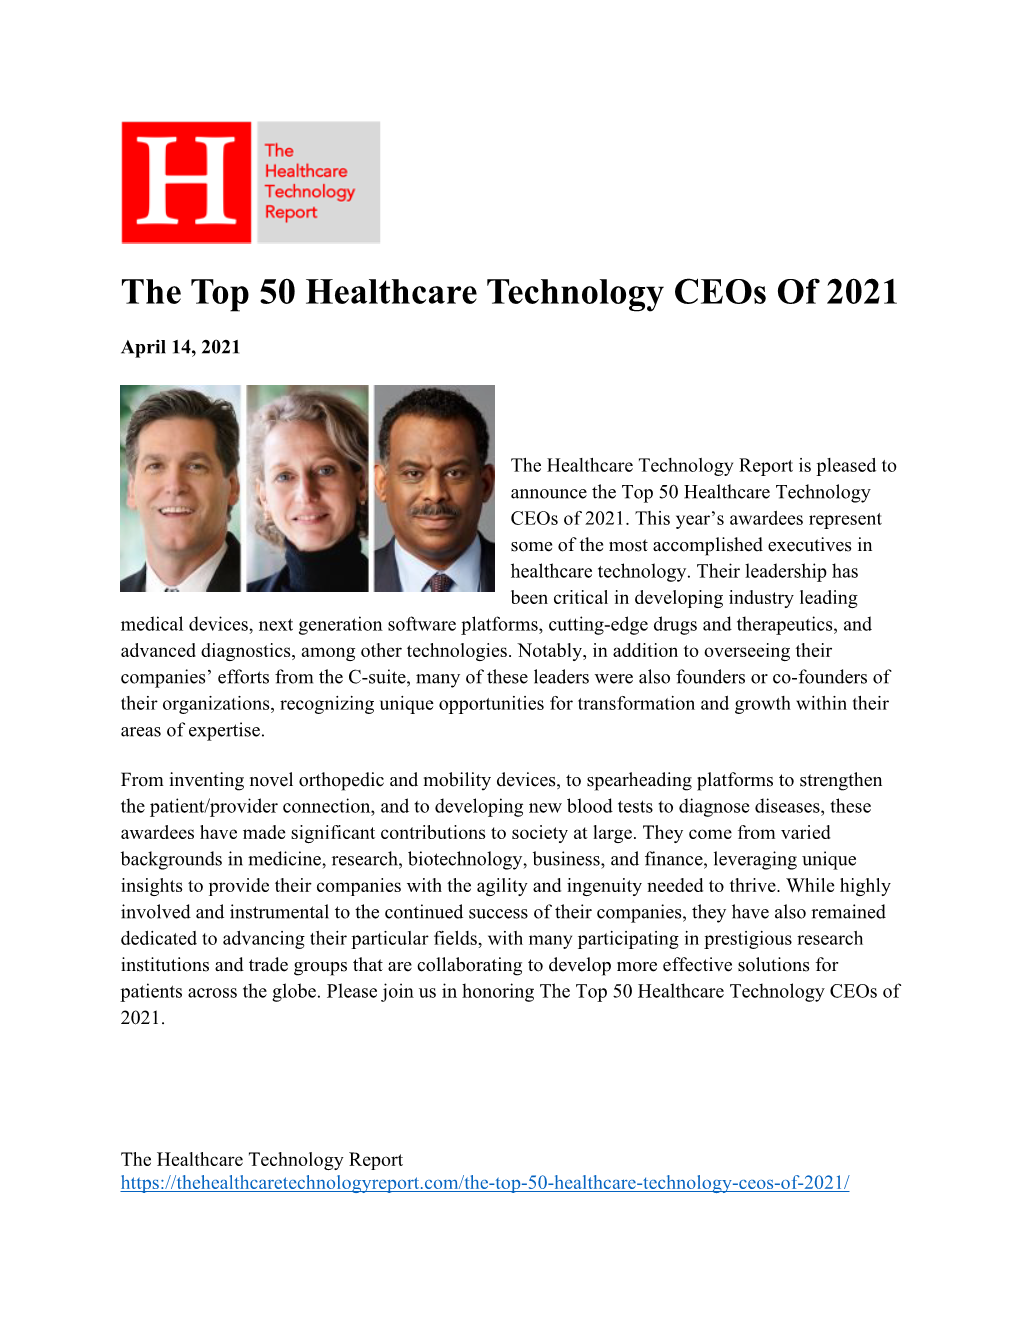 The Top 50 Healthcare Technology Ceos of 2021